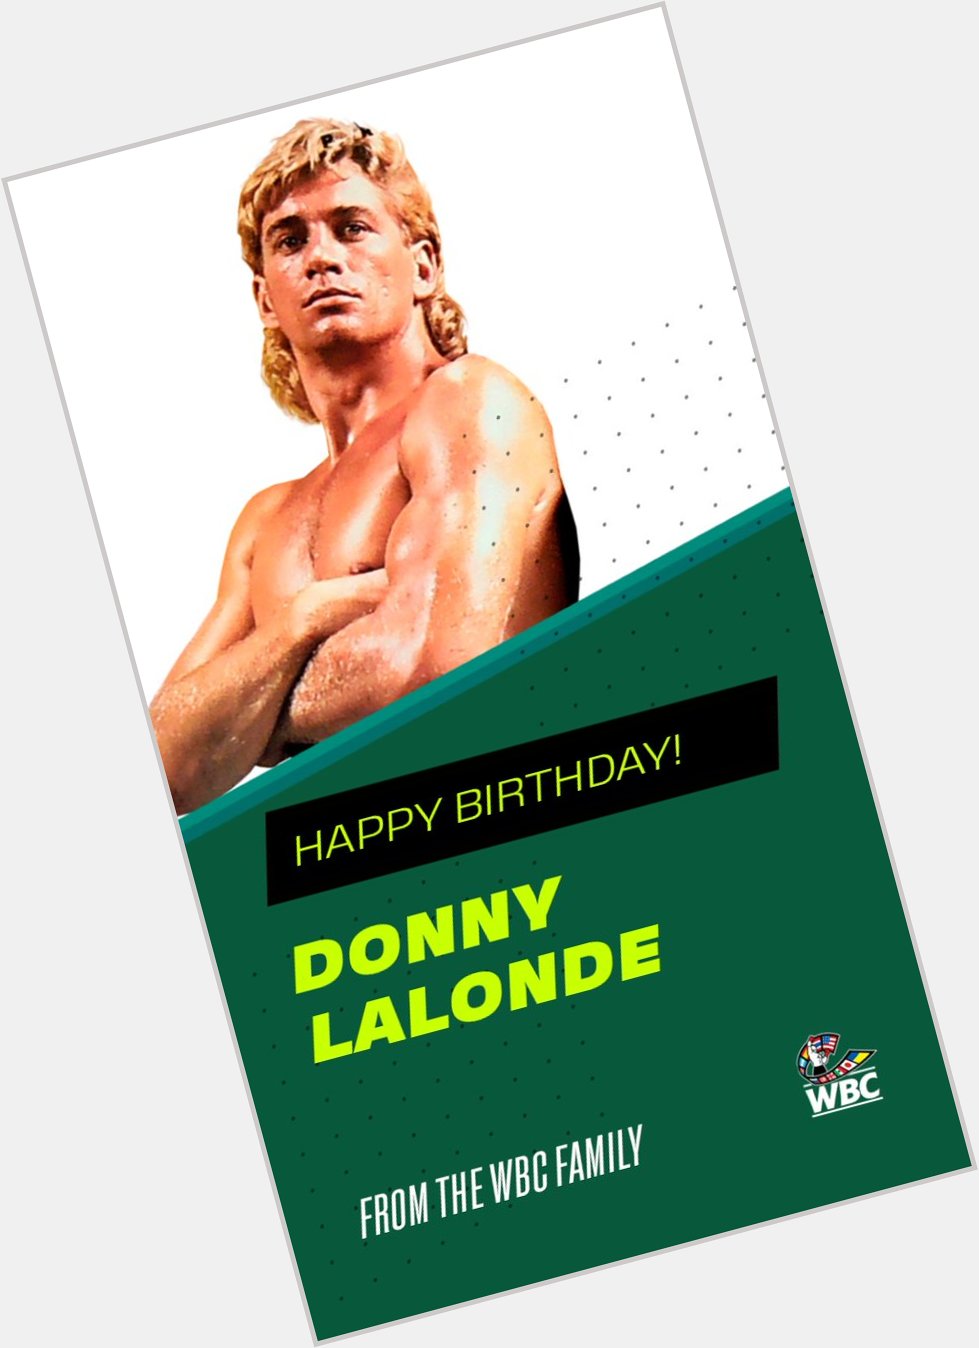 Happy Birthday to our proud former world Champion, Donny Lalonde     